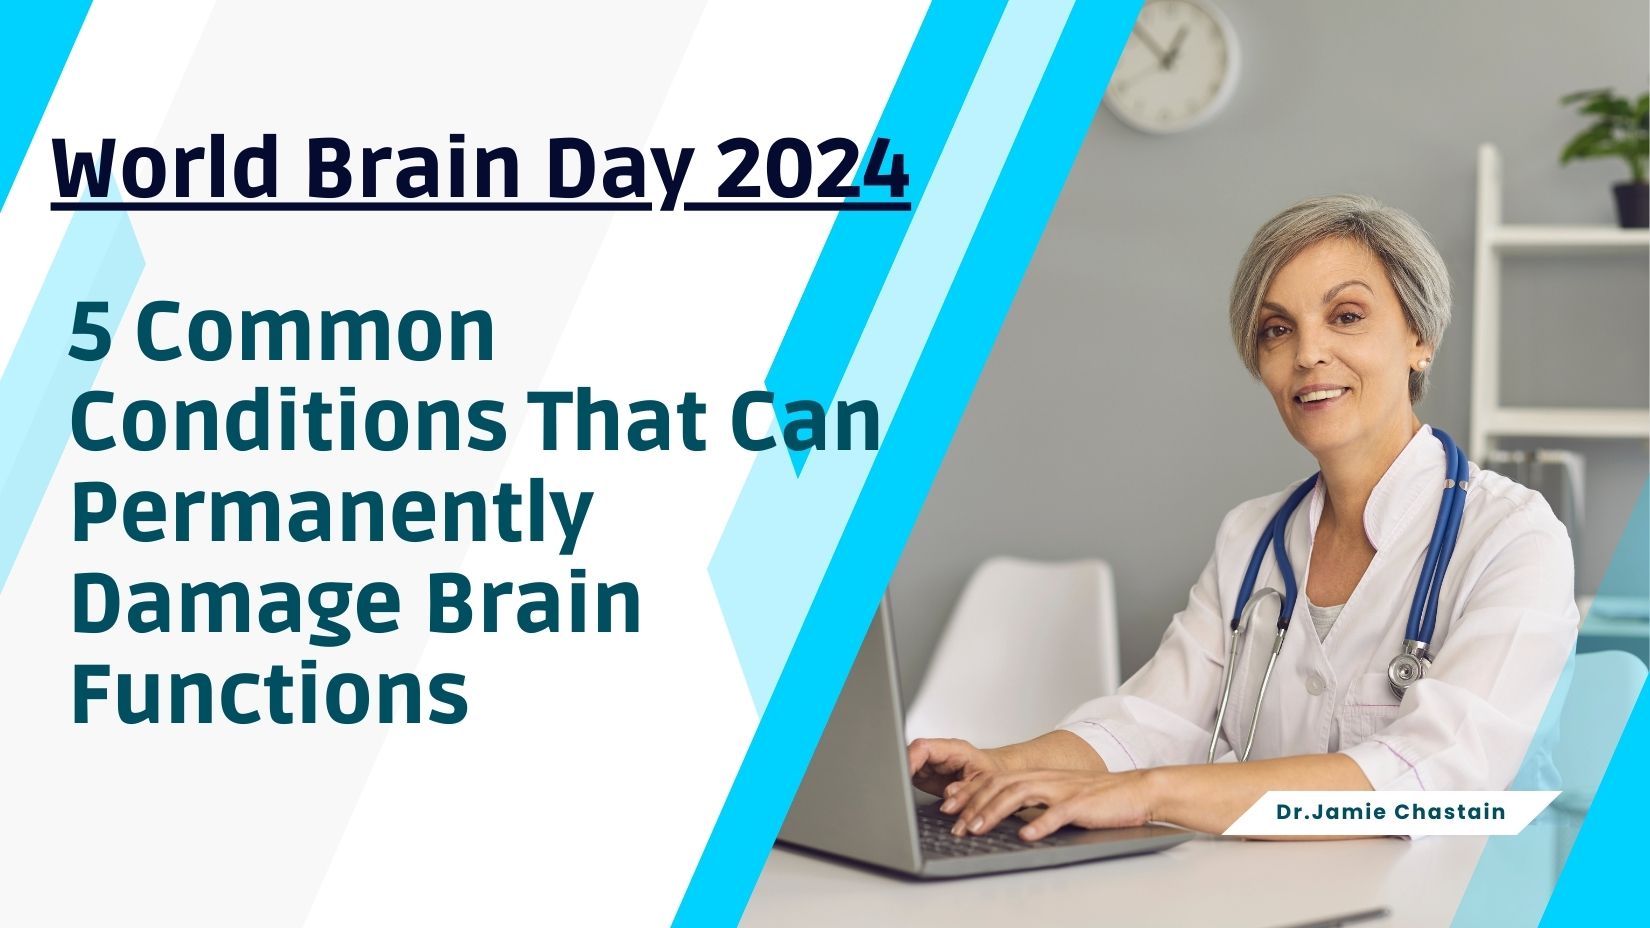 World Brain Day 2024: 5 Common Conditions That Can Permanently Damage Brain Functions [Video]